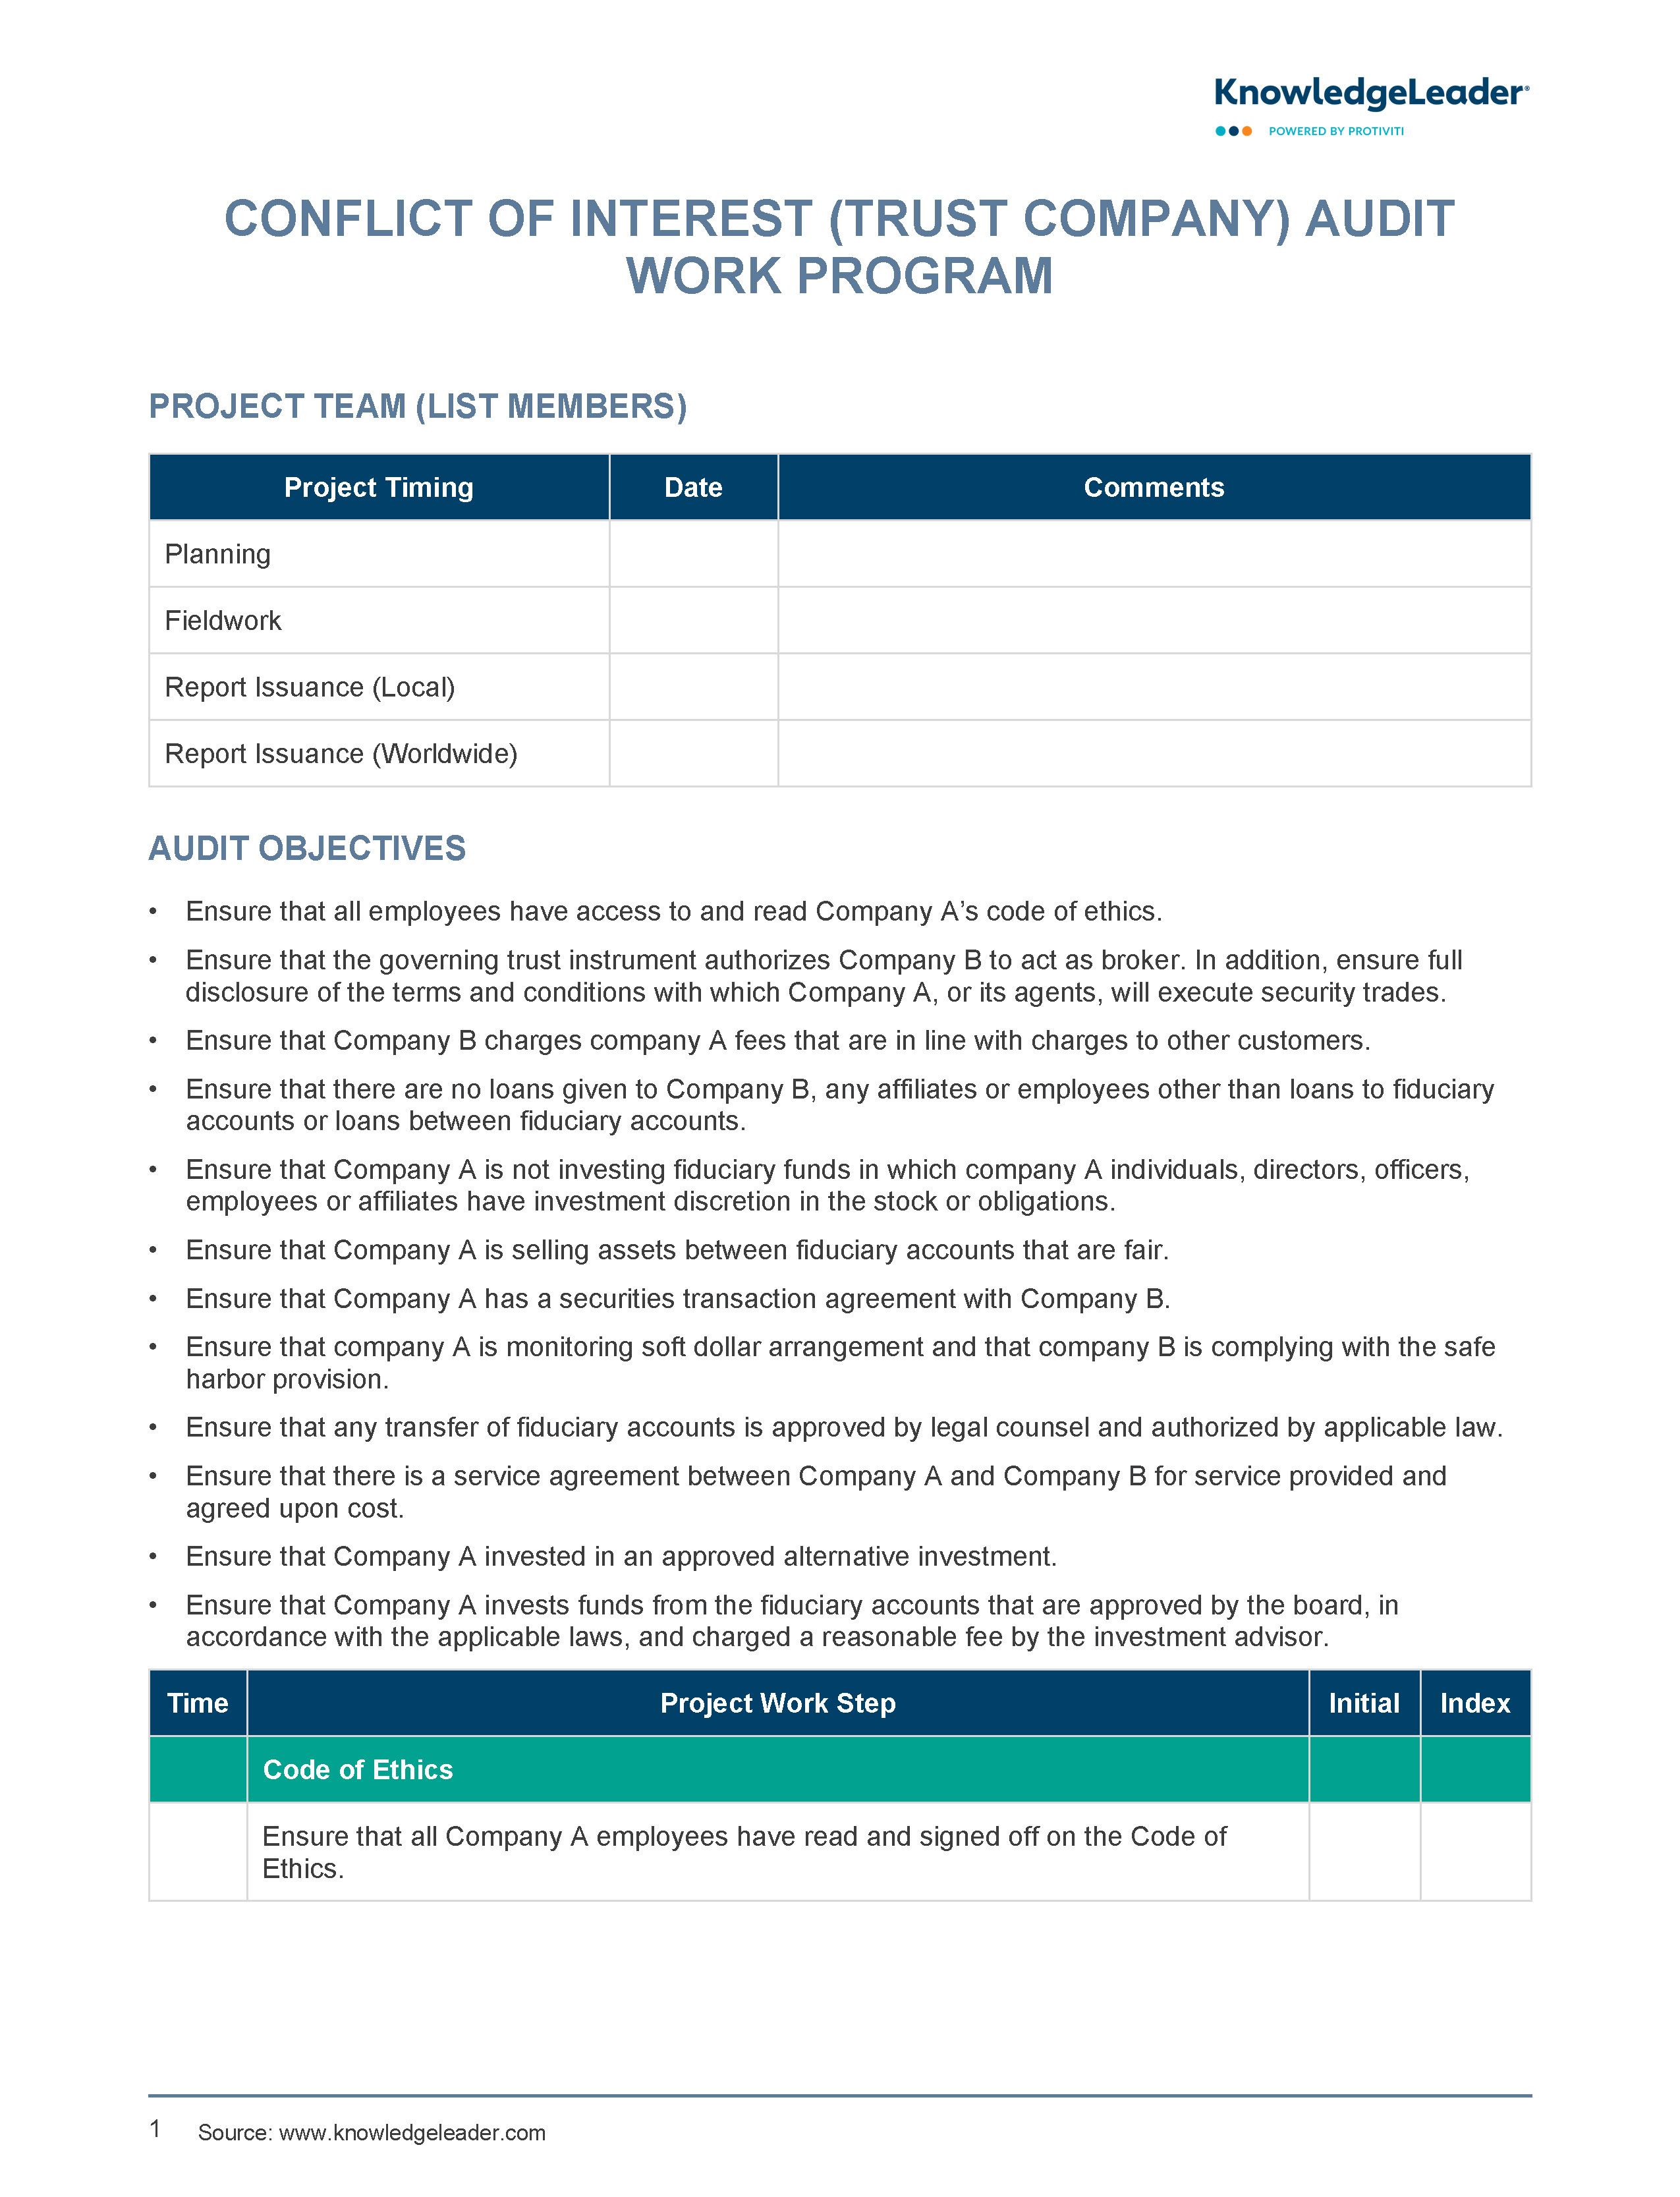 Screenshot of the first page of Conflict of Interest (Trust Company) Audit Work Program